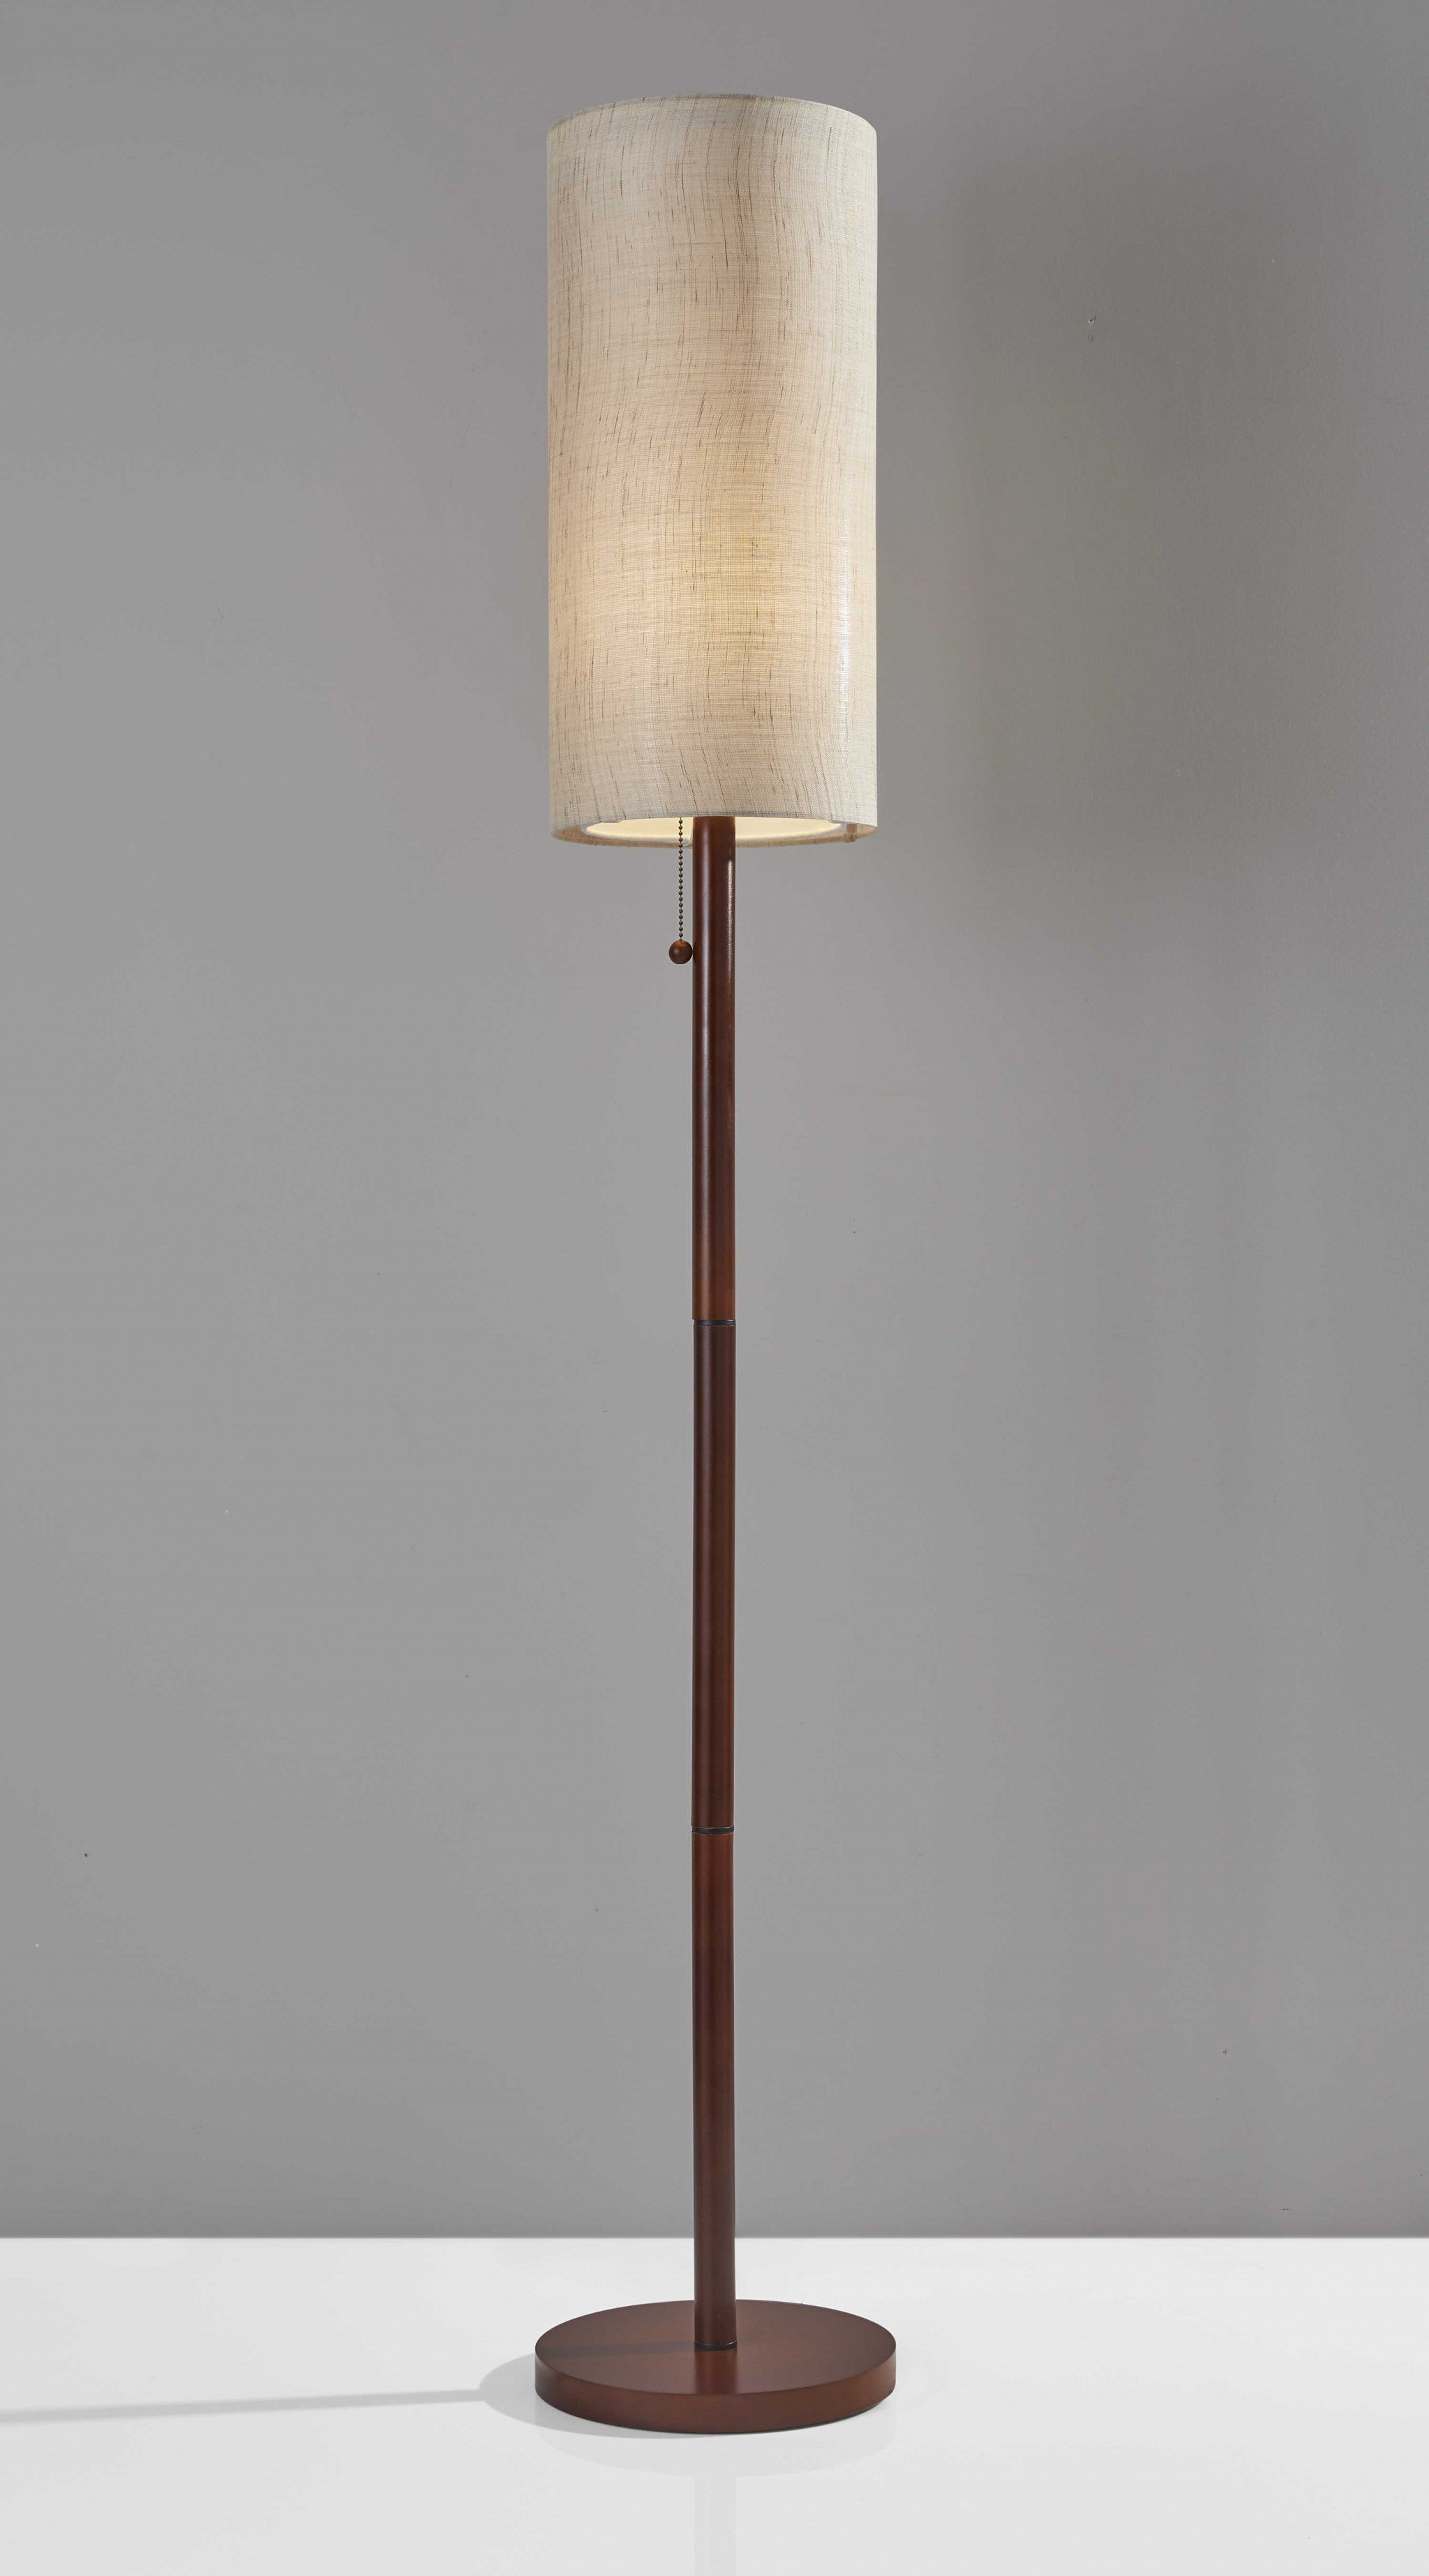 65" Solid Wood Traditional Shaped Floor Lamp With Beige Drum Shade